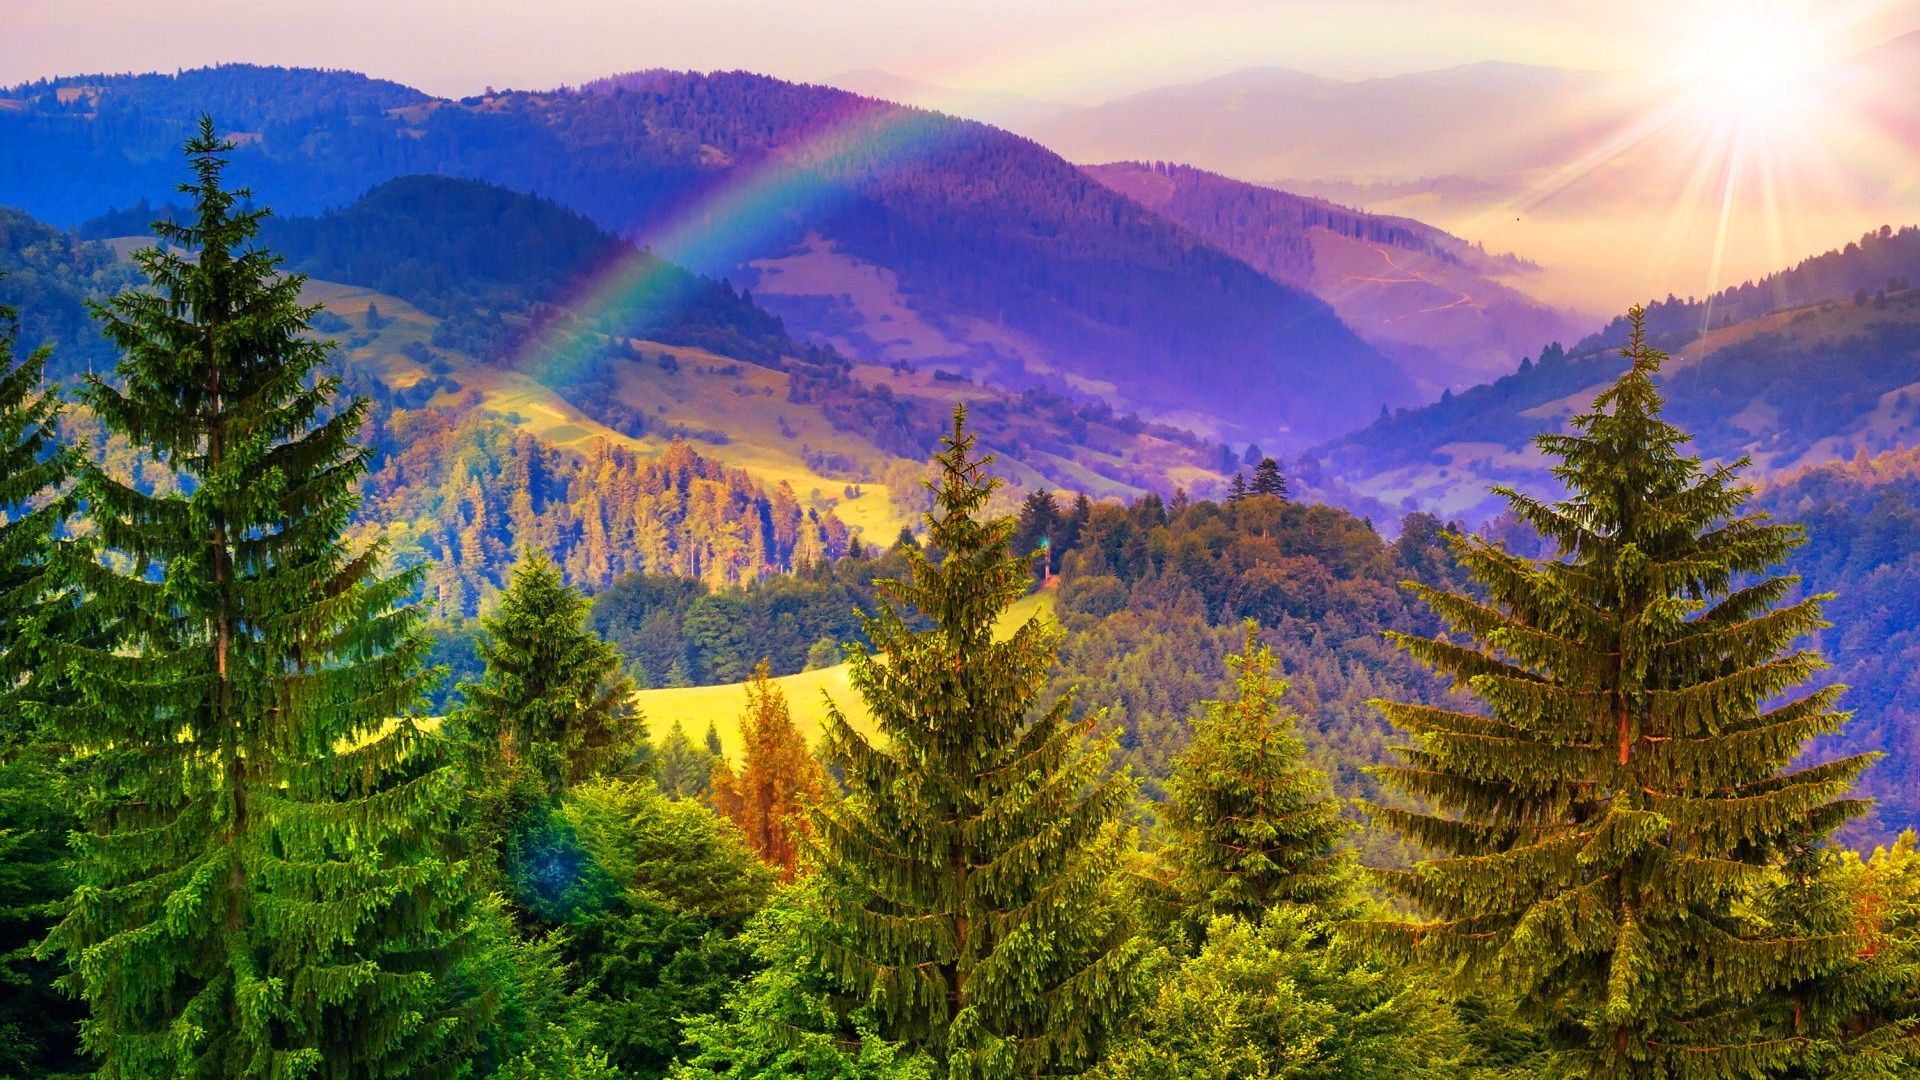 Rainbow over Mountains HD Wallpaper